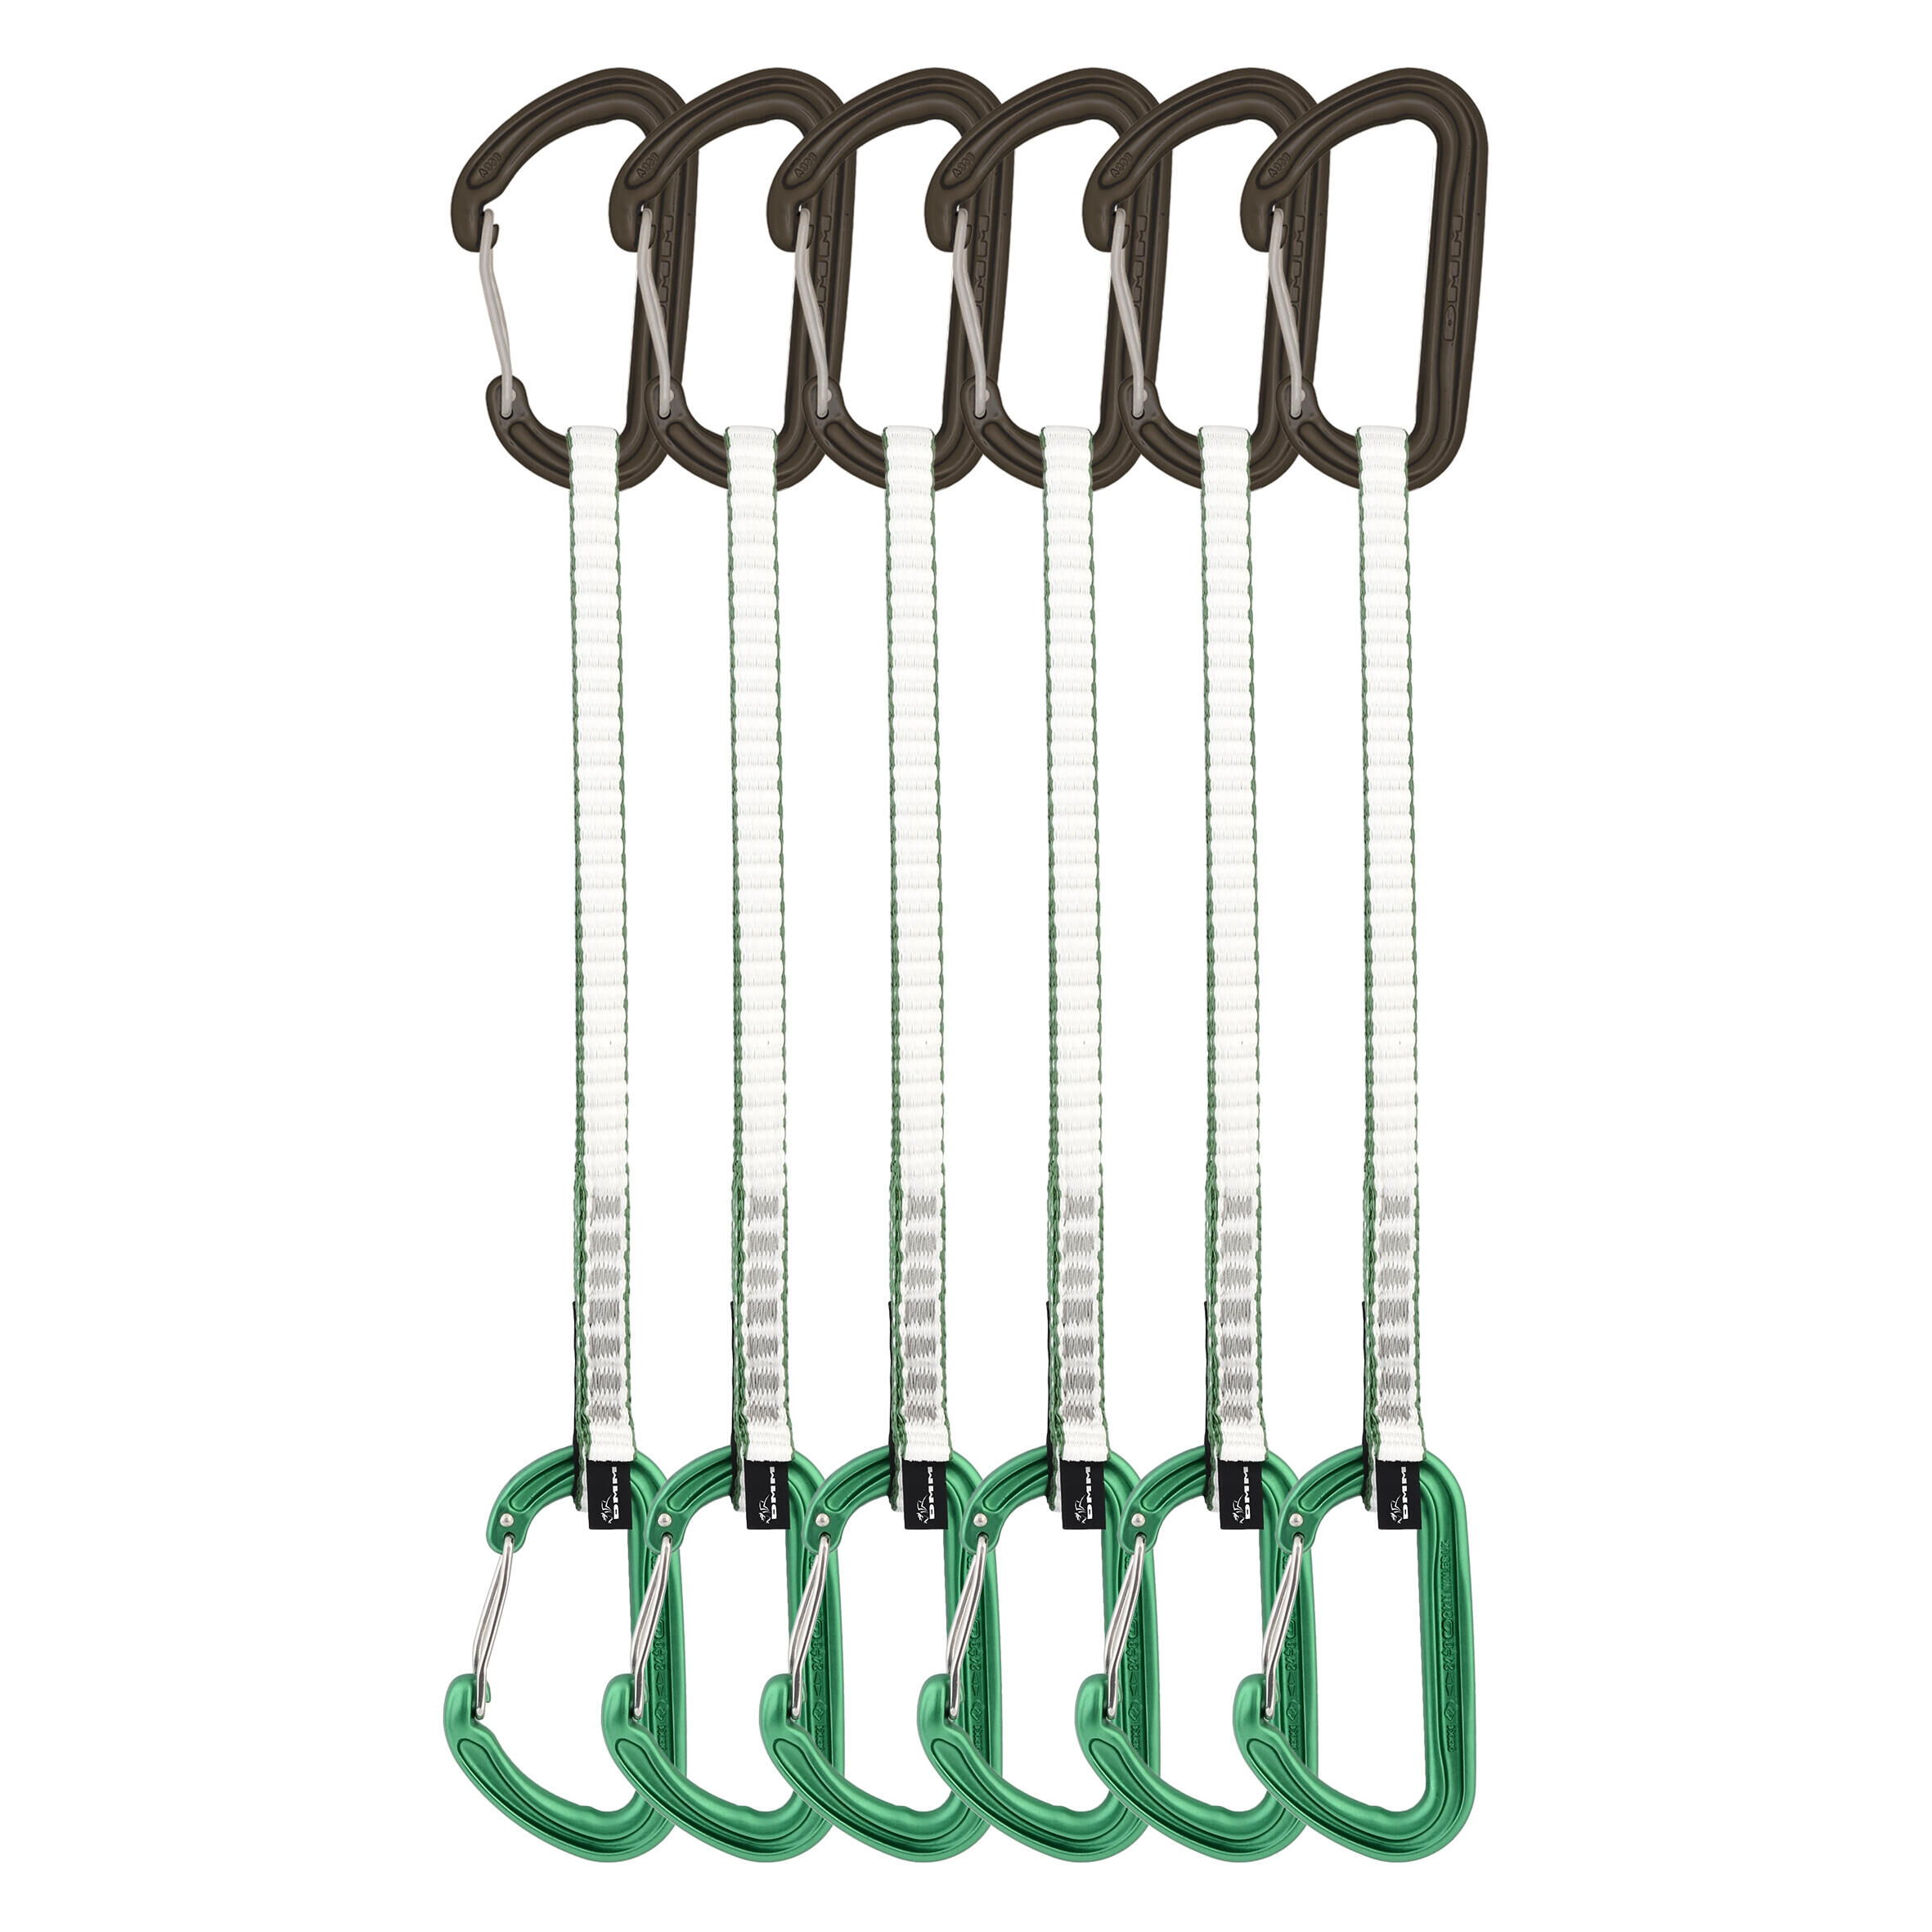 DMM Spectre Quickdraw 25cm - Green - 6 Pack